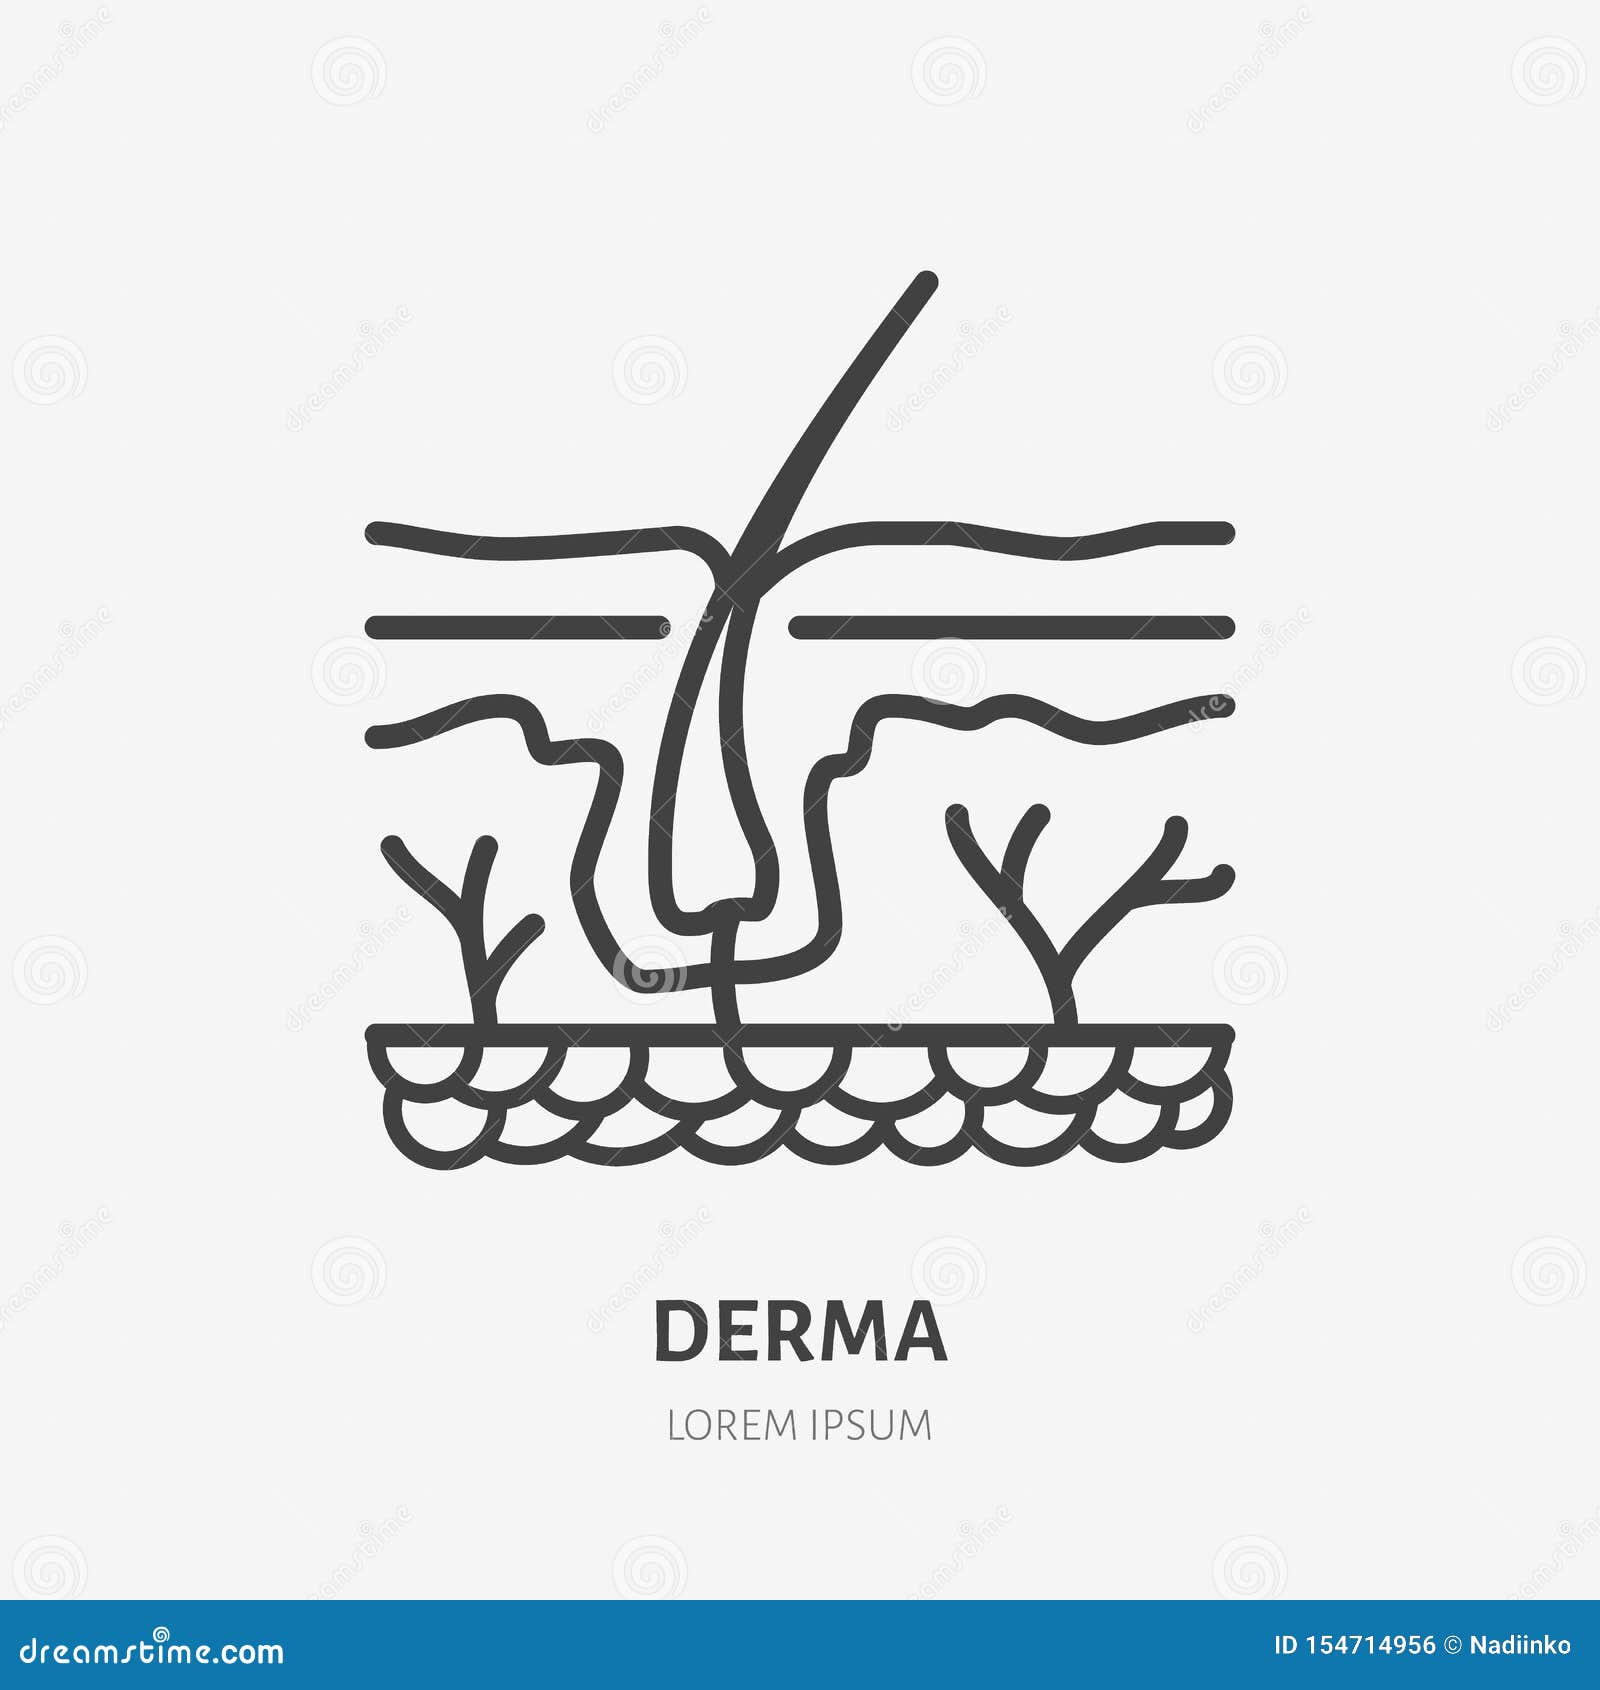 skin layer flat line icon.  thin pictogram of human epidermis, outline  for dermatology clinic